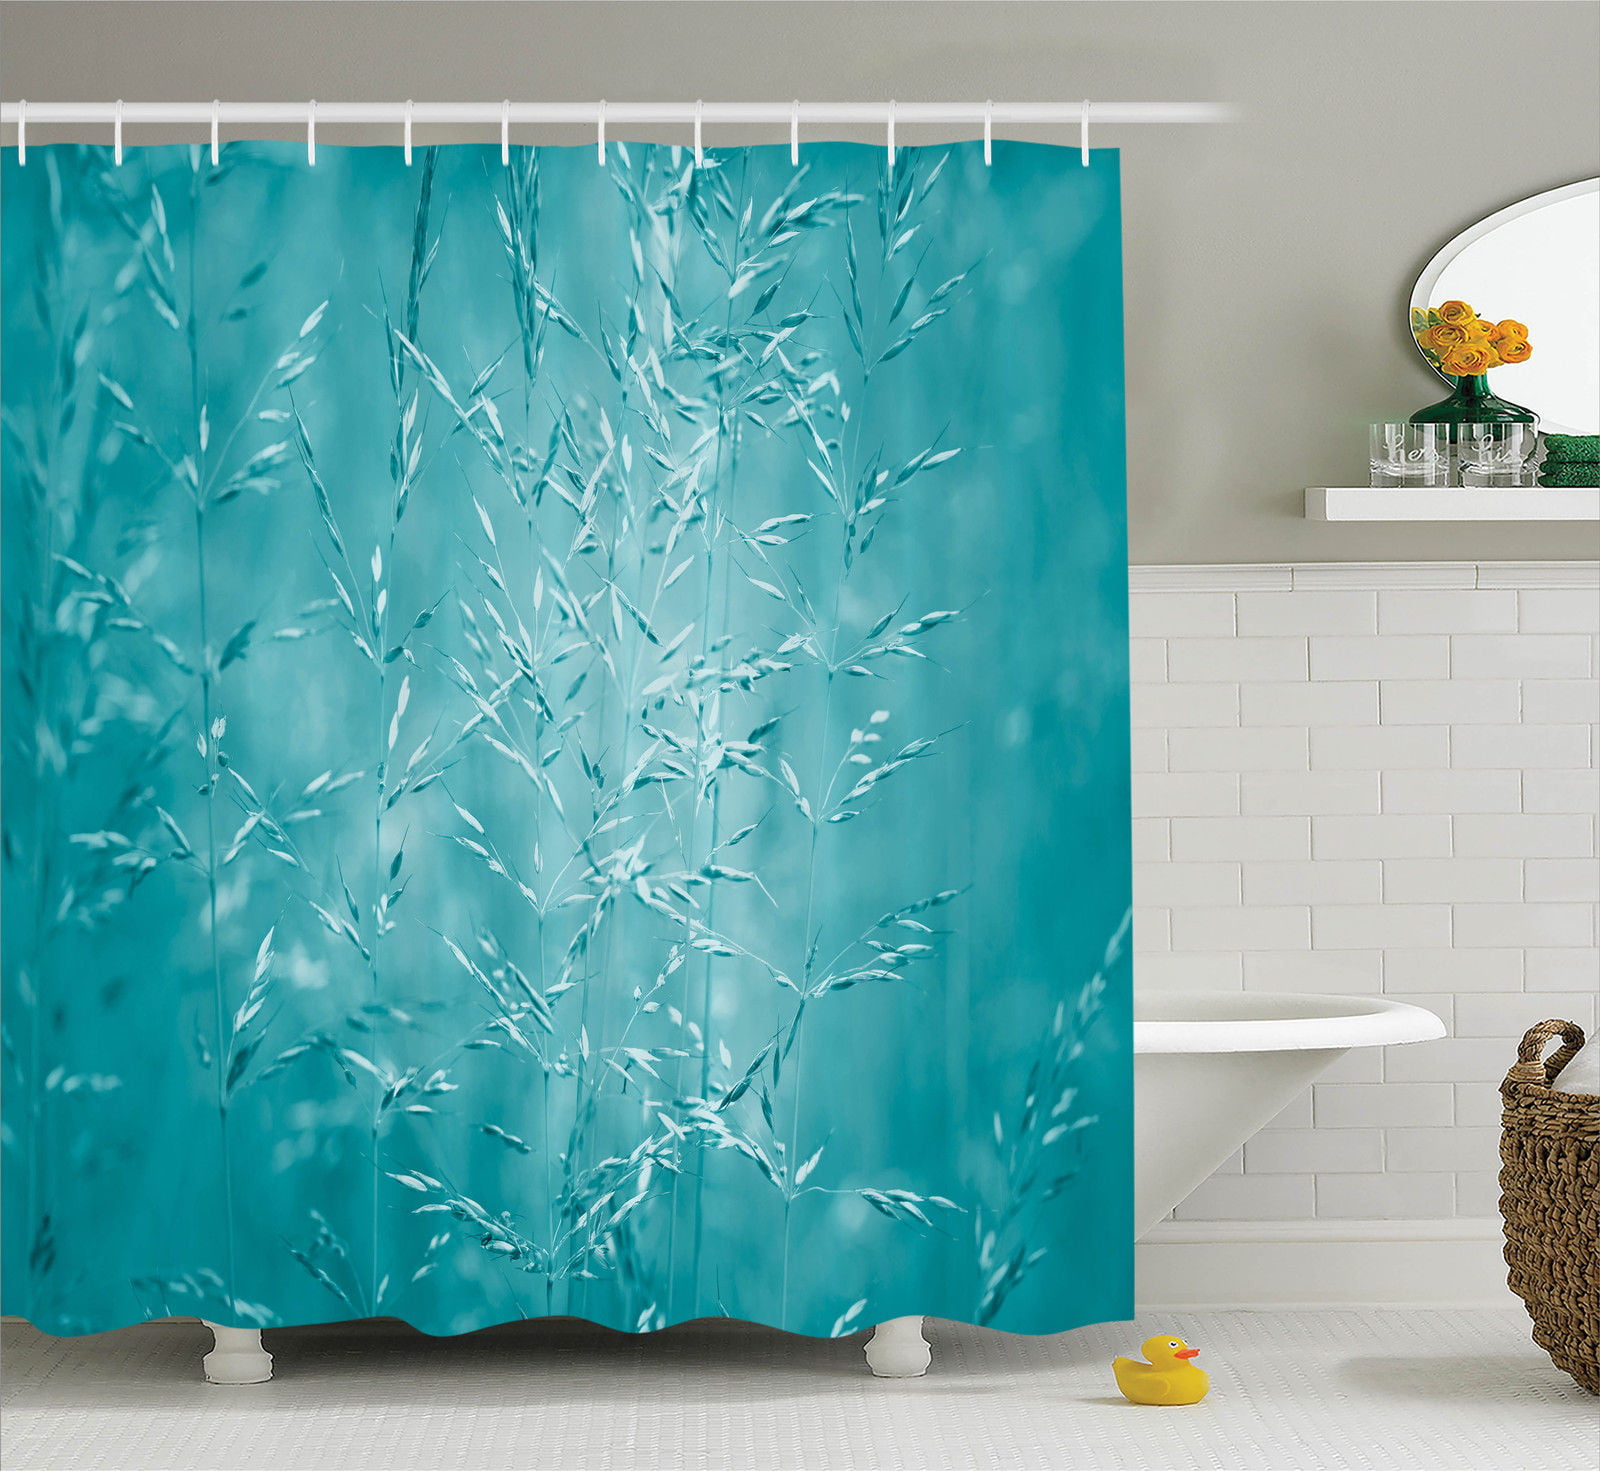 Details about   3D Printed Bathroom Shower Curtain Waterproof Extra Long Wide With Hooks Decor 